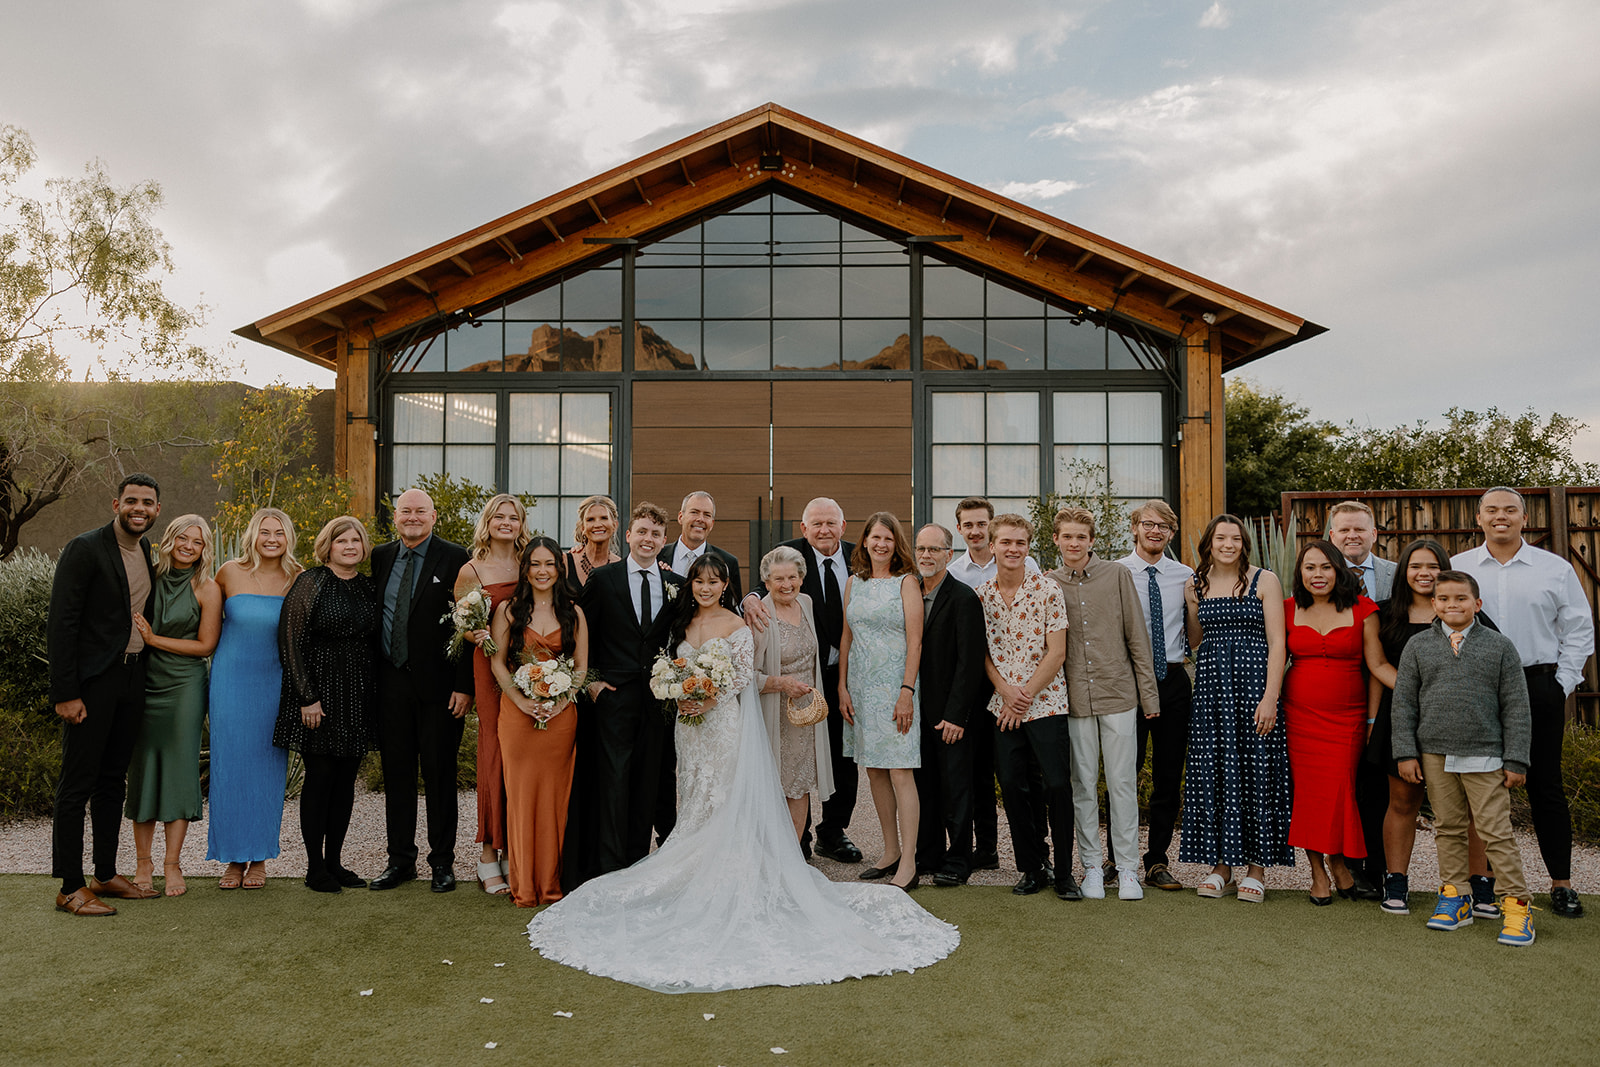 guests and wedding party pose together in front of the dreamy Paseo wedding venue 